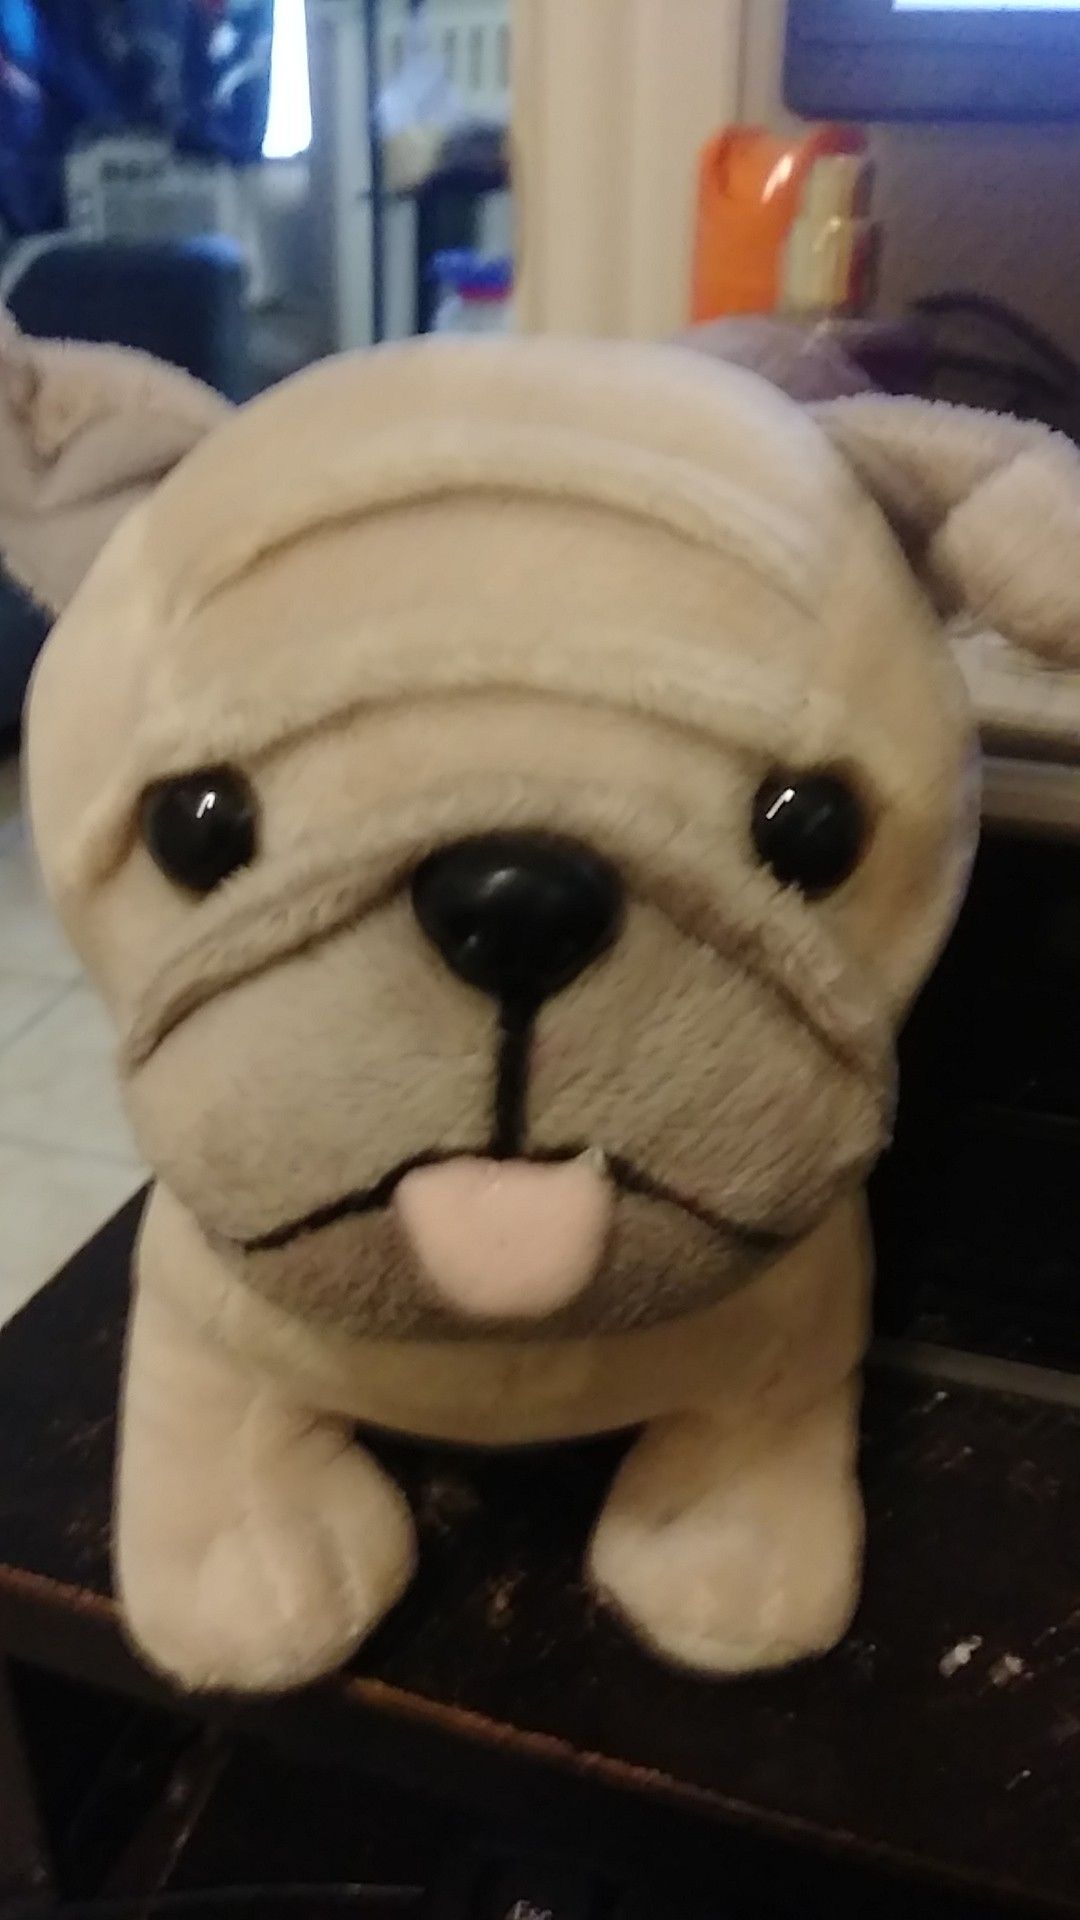 Pit bull stuffed animal cute as can be